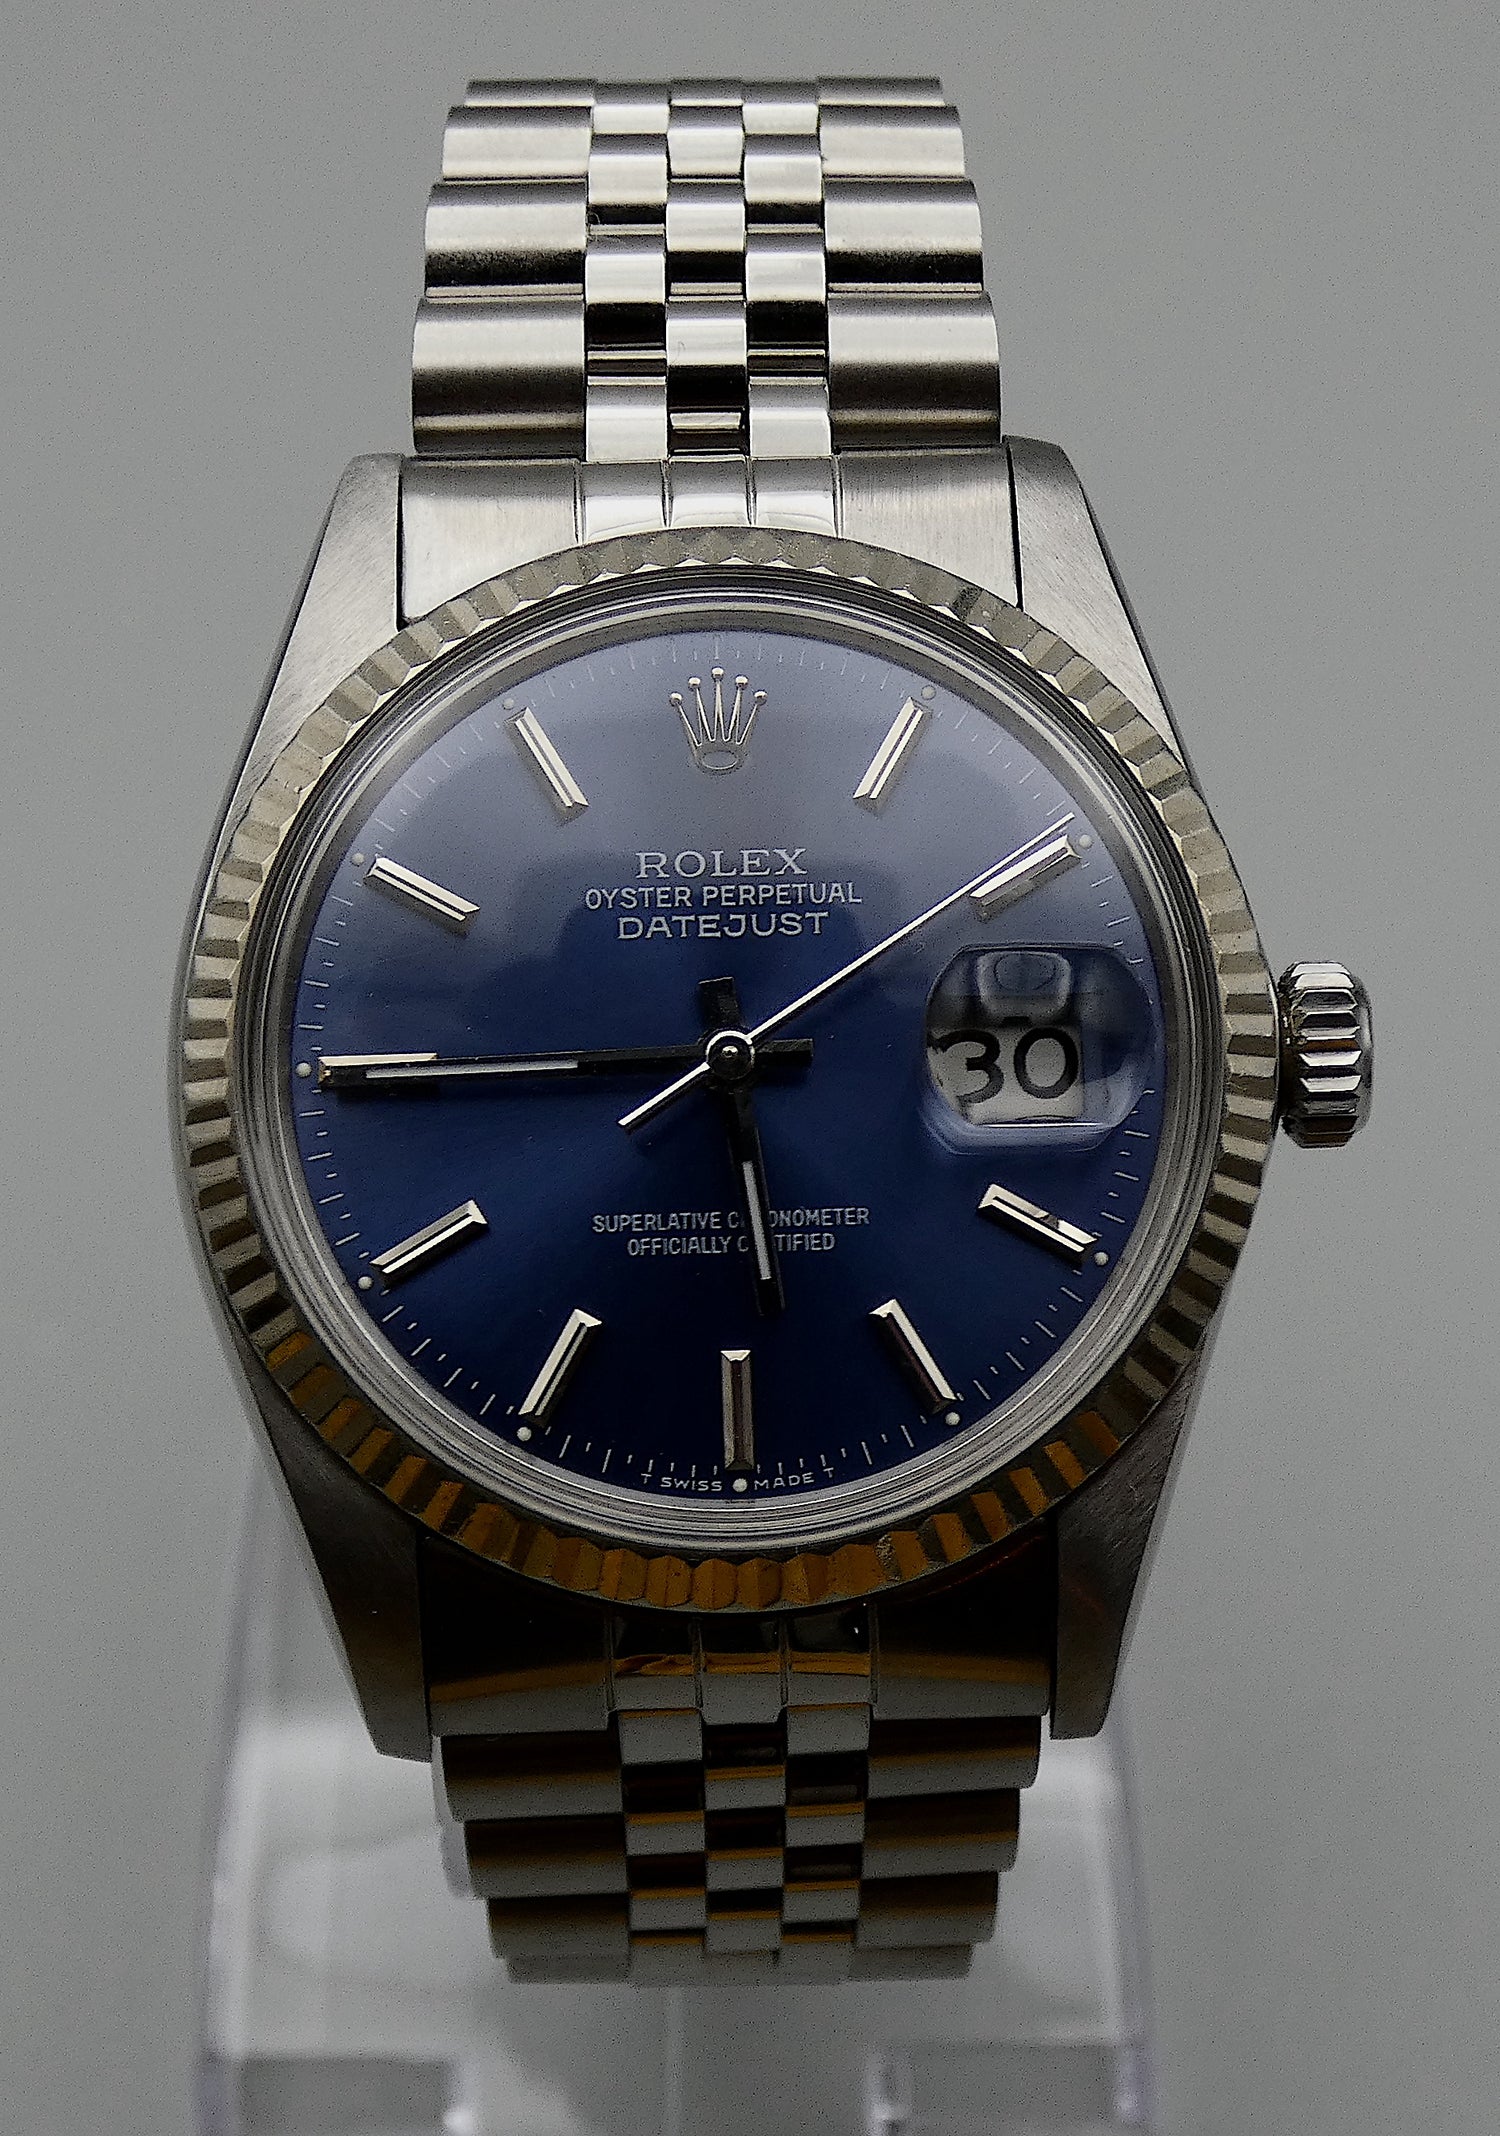 SOLD Datejust 36 Blue 1985 MINT / Serviced with warranty